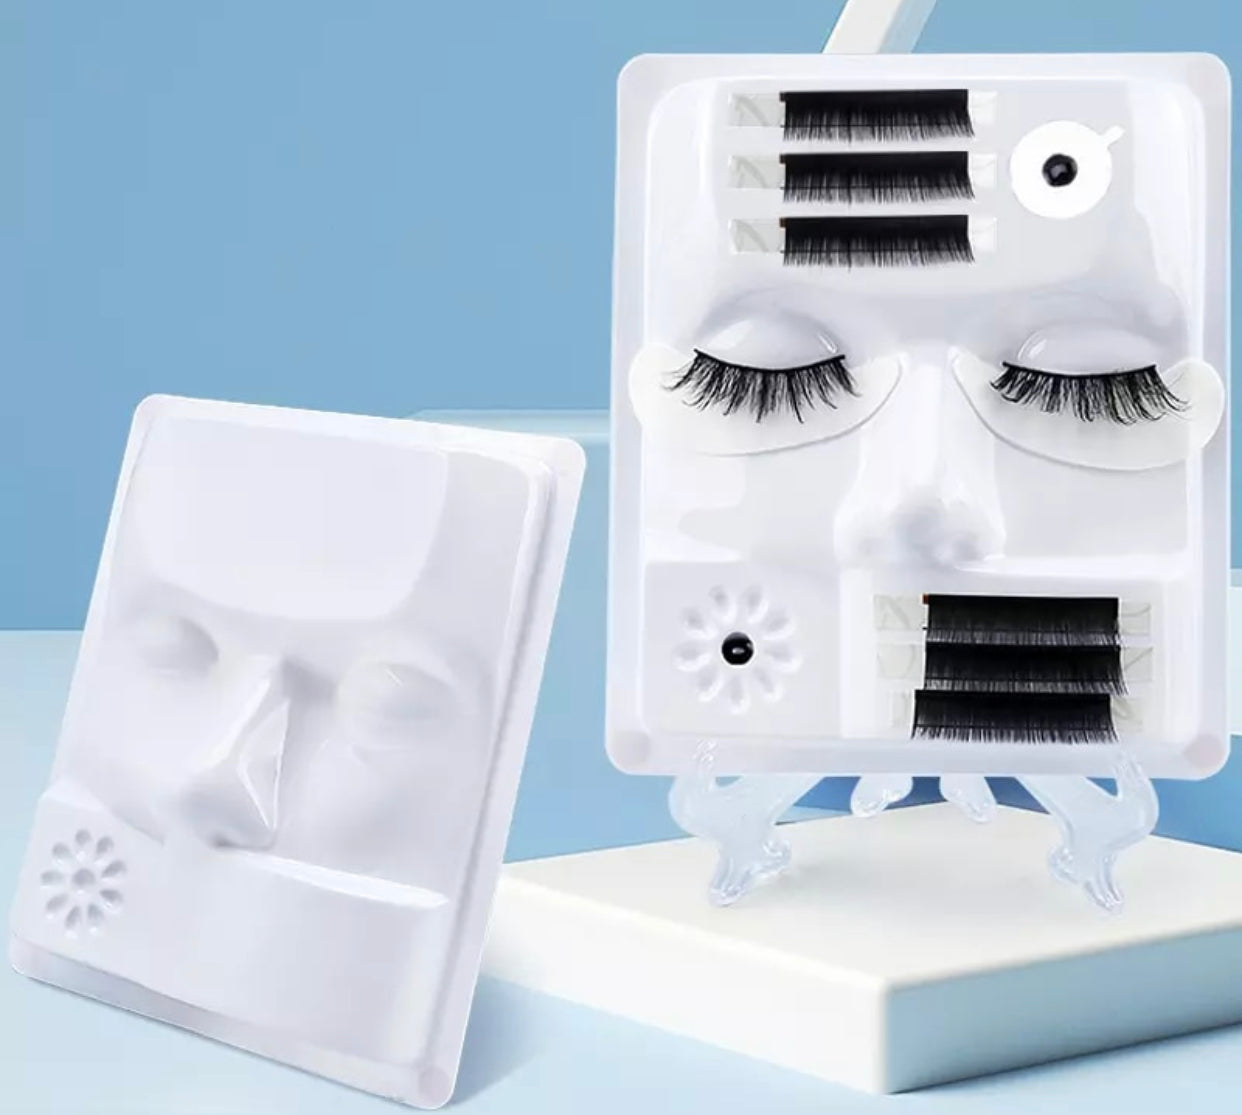 PLASTIC TRAY / face to practice eyelash extensions/lamination